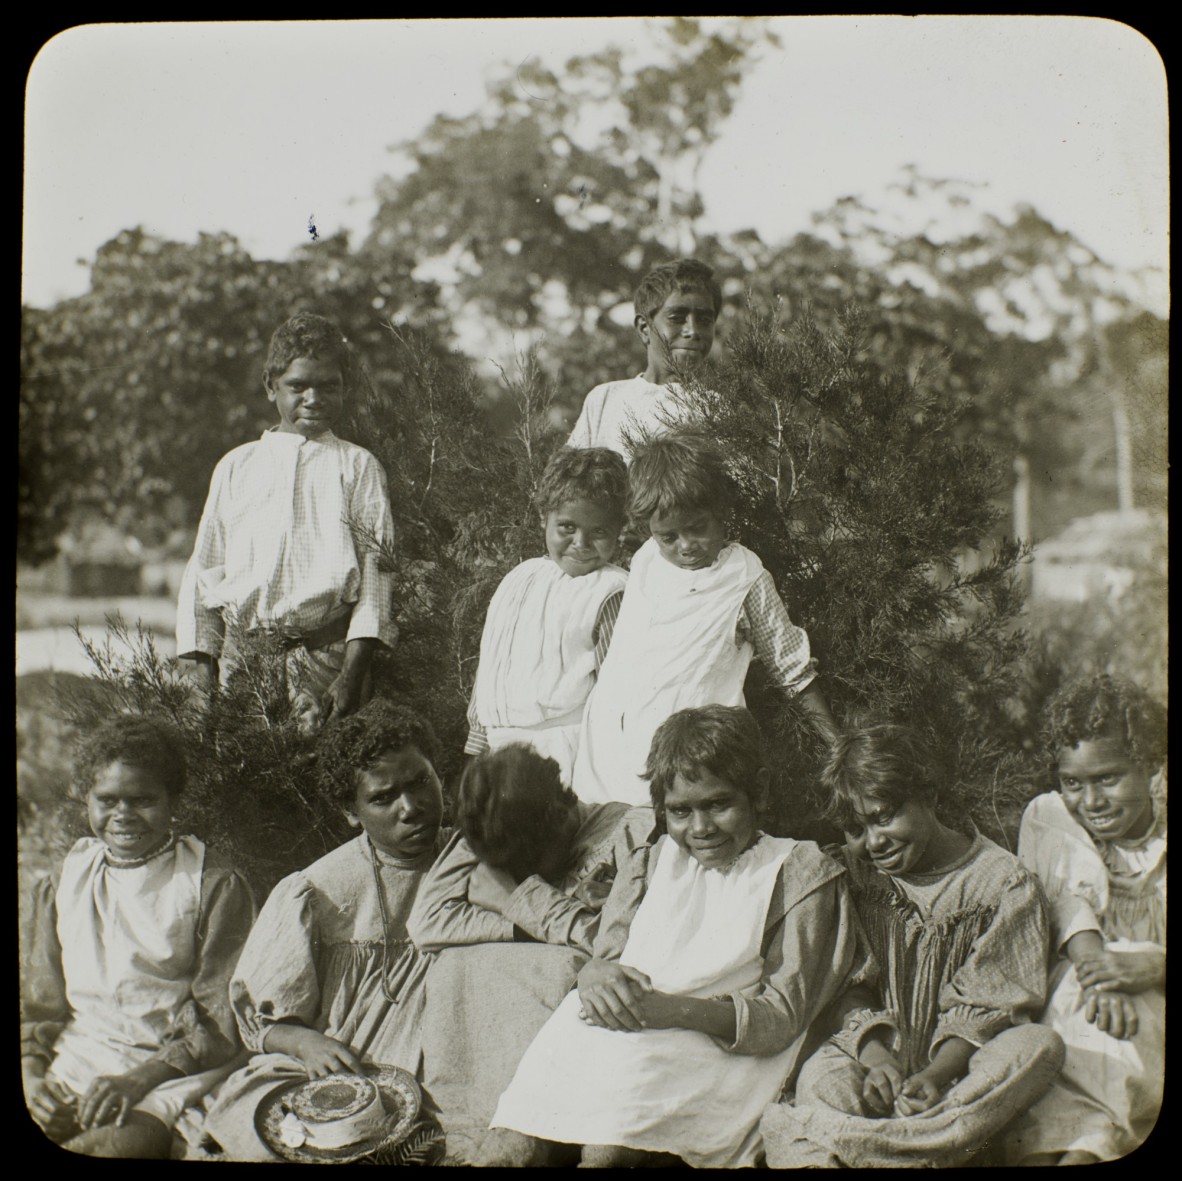 Group of First Nations children in front of shrubs, four children are standing with six children sitting on the ground in front.